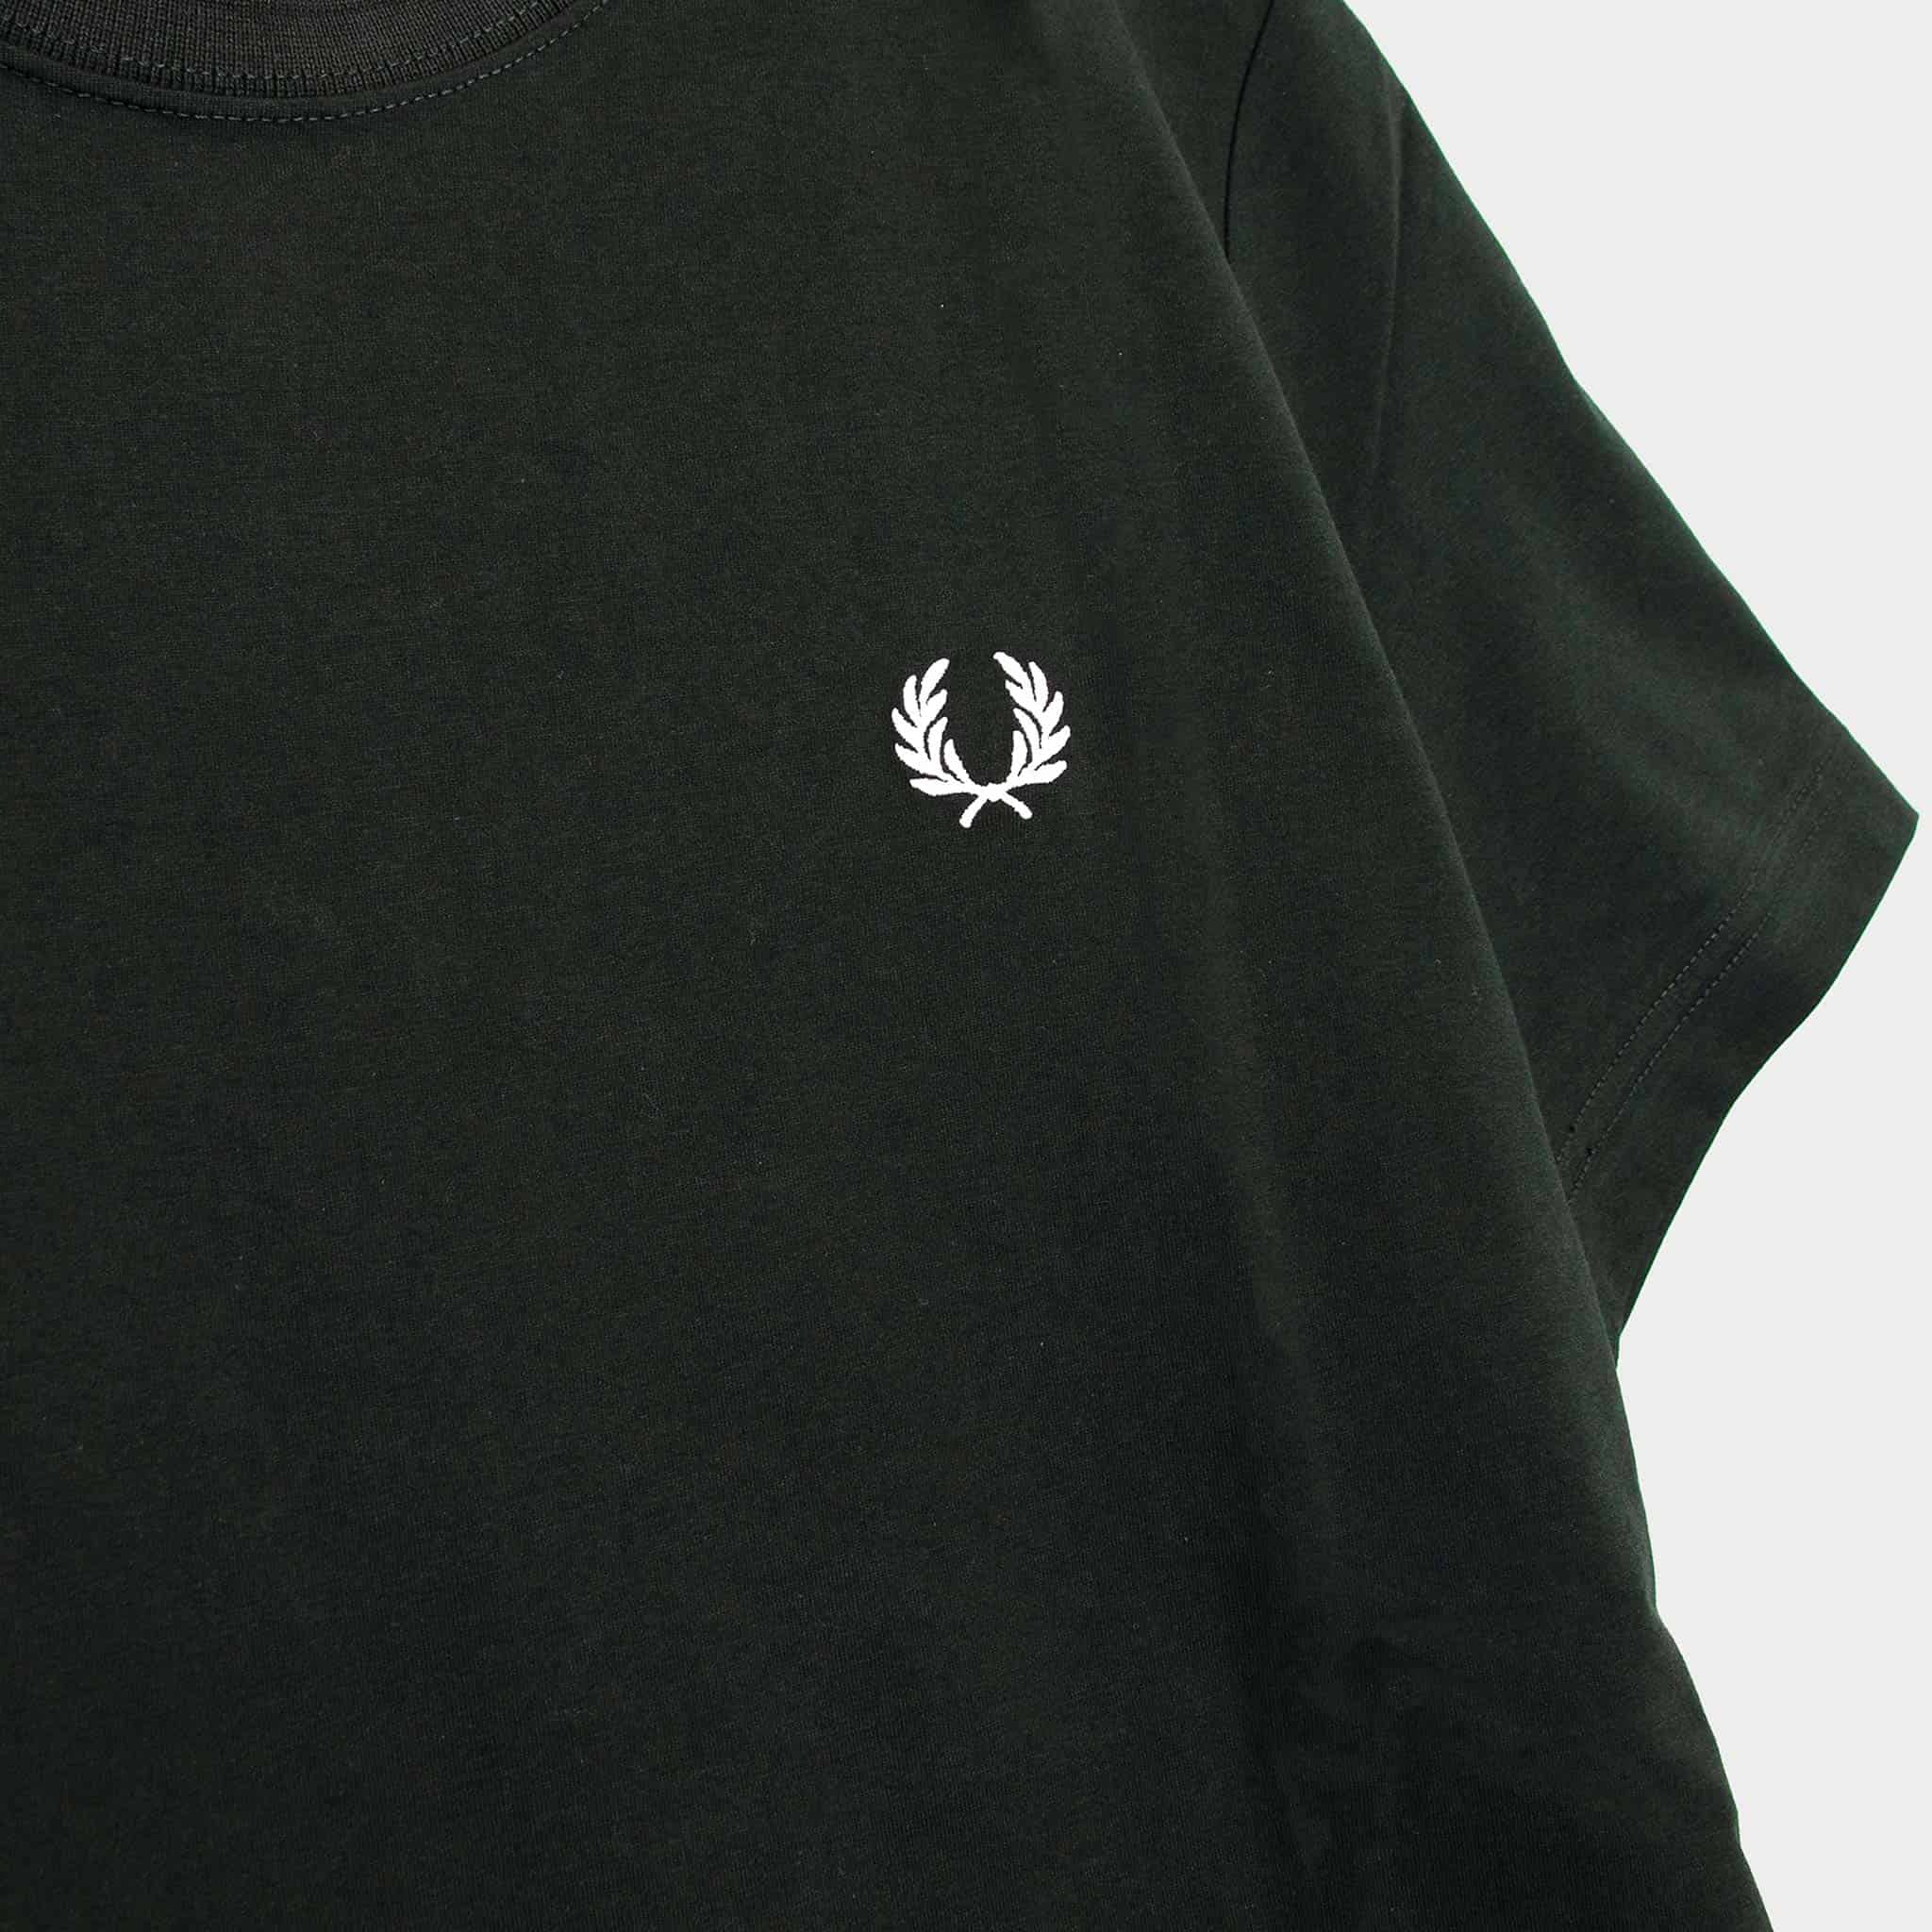 FRED PERRY CREW NECK T-SHIRT M1600